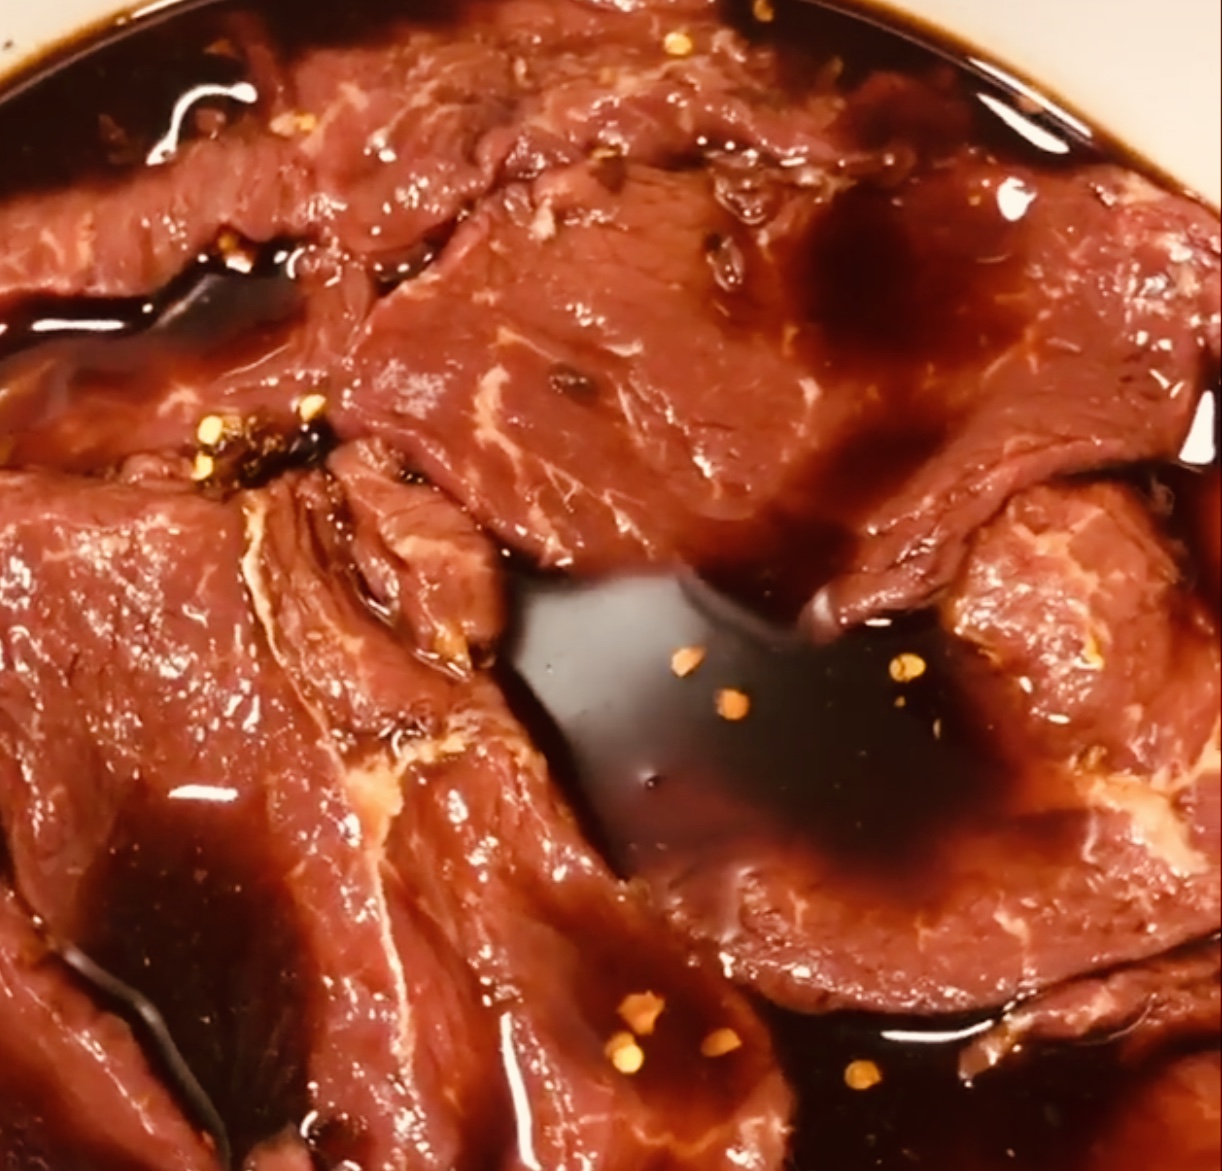 Recipe for cider soy marinade with bourbon whisky for steaks